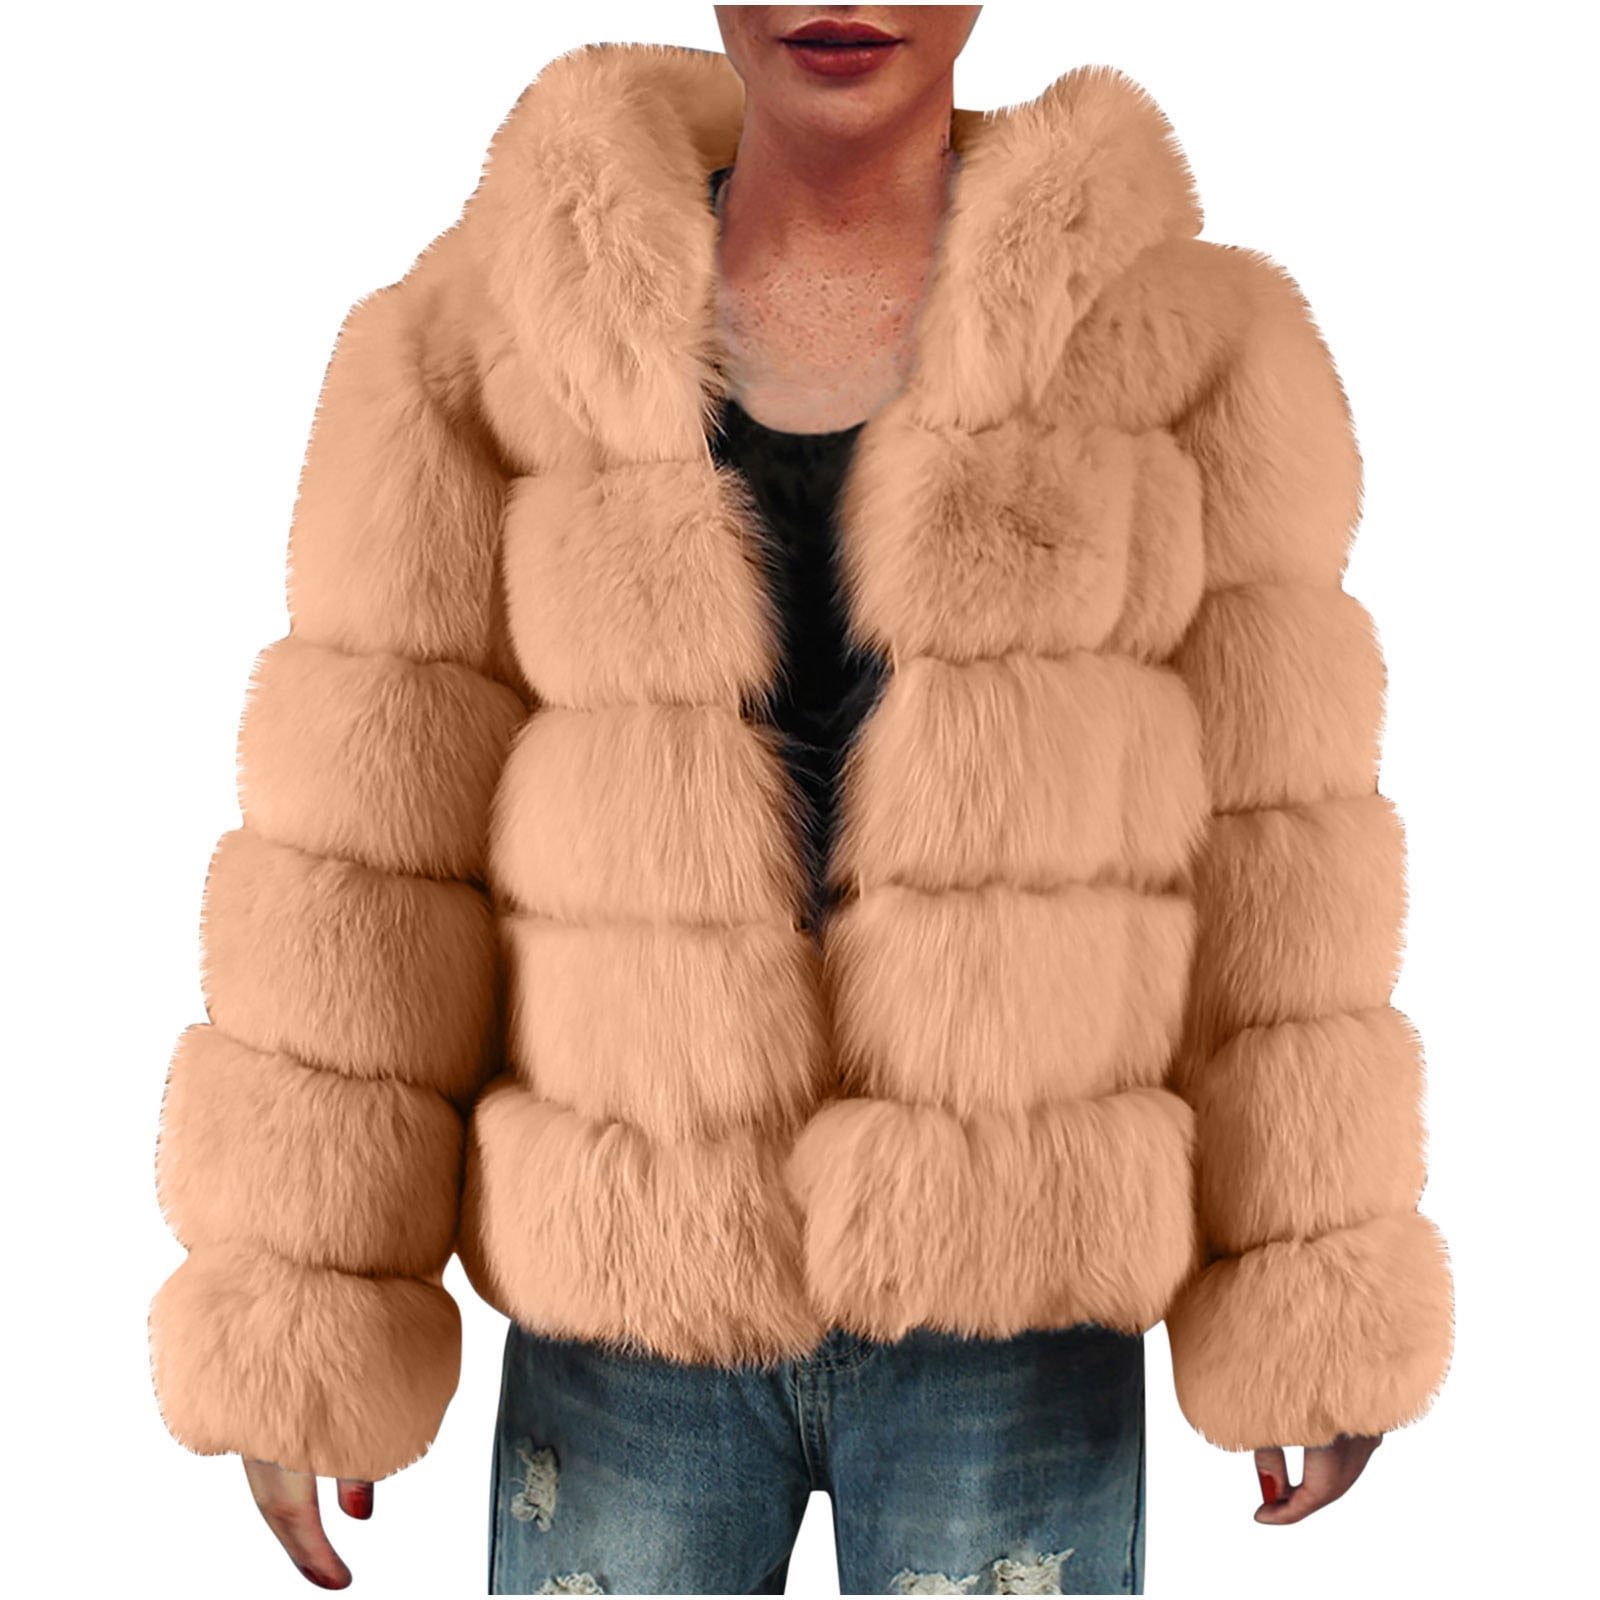 New Women Real Fur Coat Winter Fashion Jacket Thick Warm Fluffy Outerwear  37373